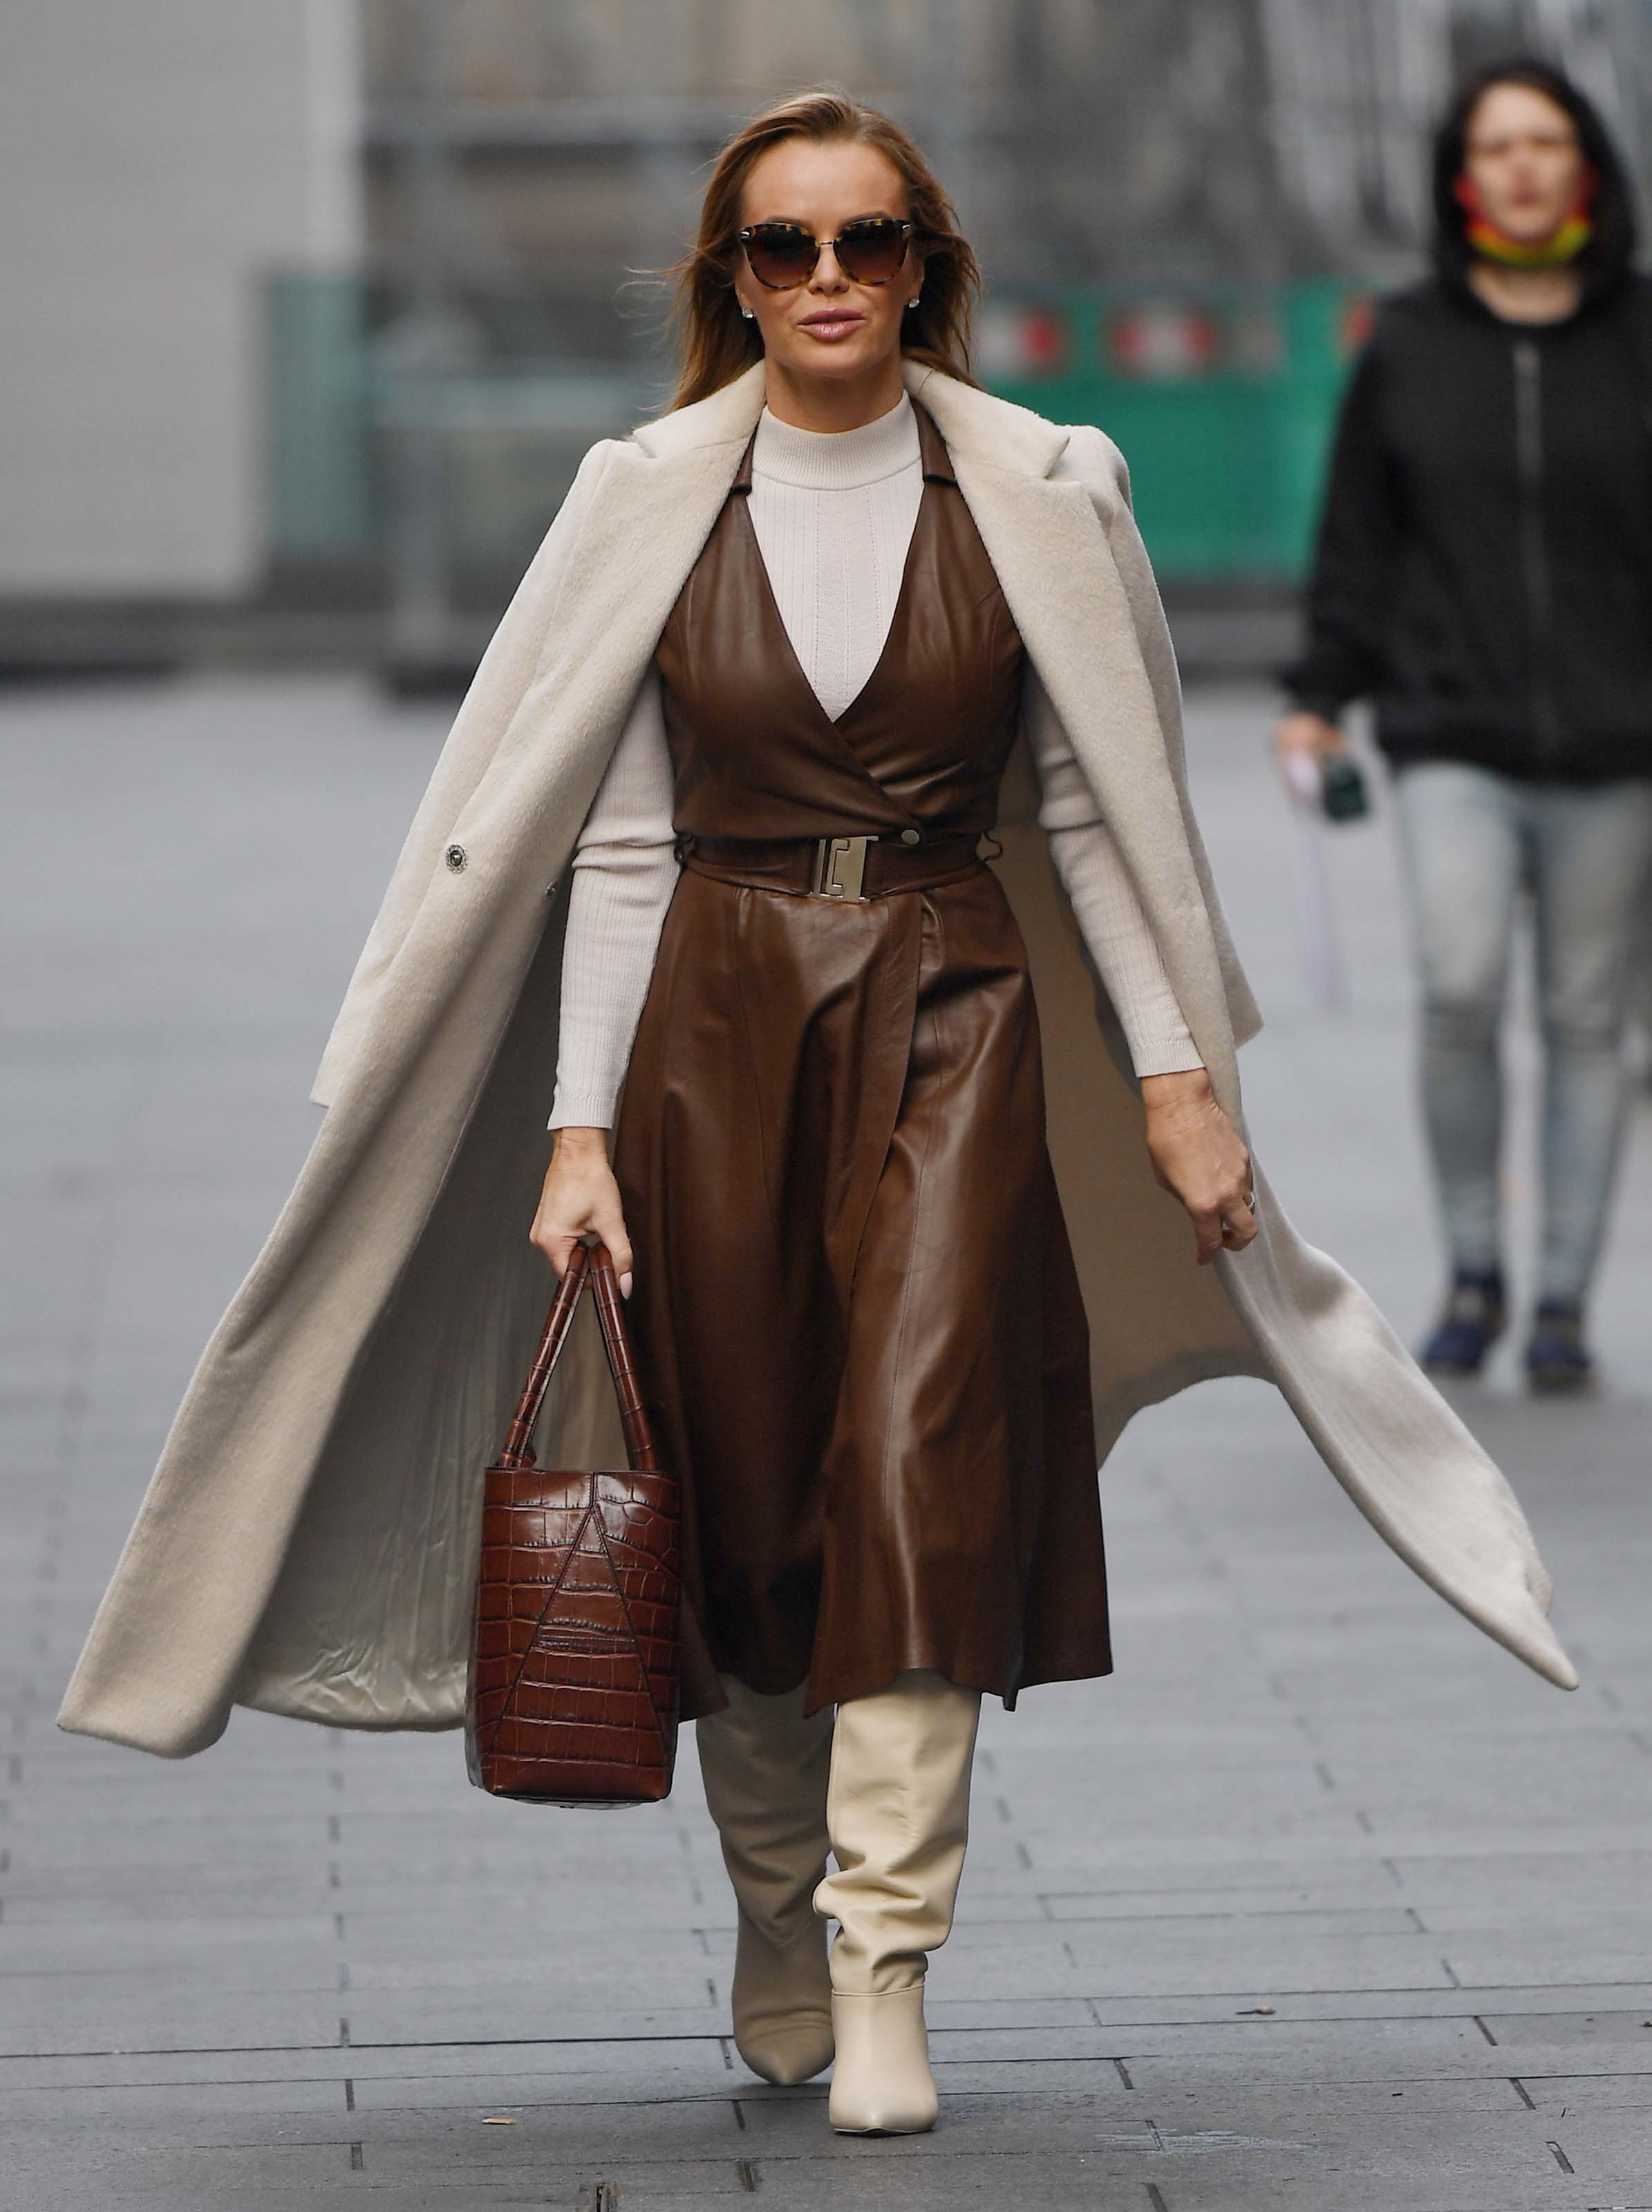 Amanda Holden seen at Global studios after the Heart Breakfast show in London